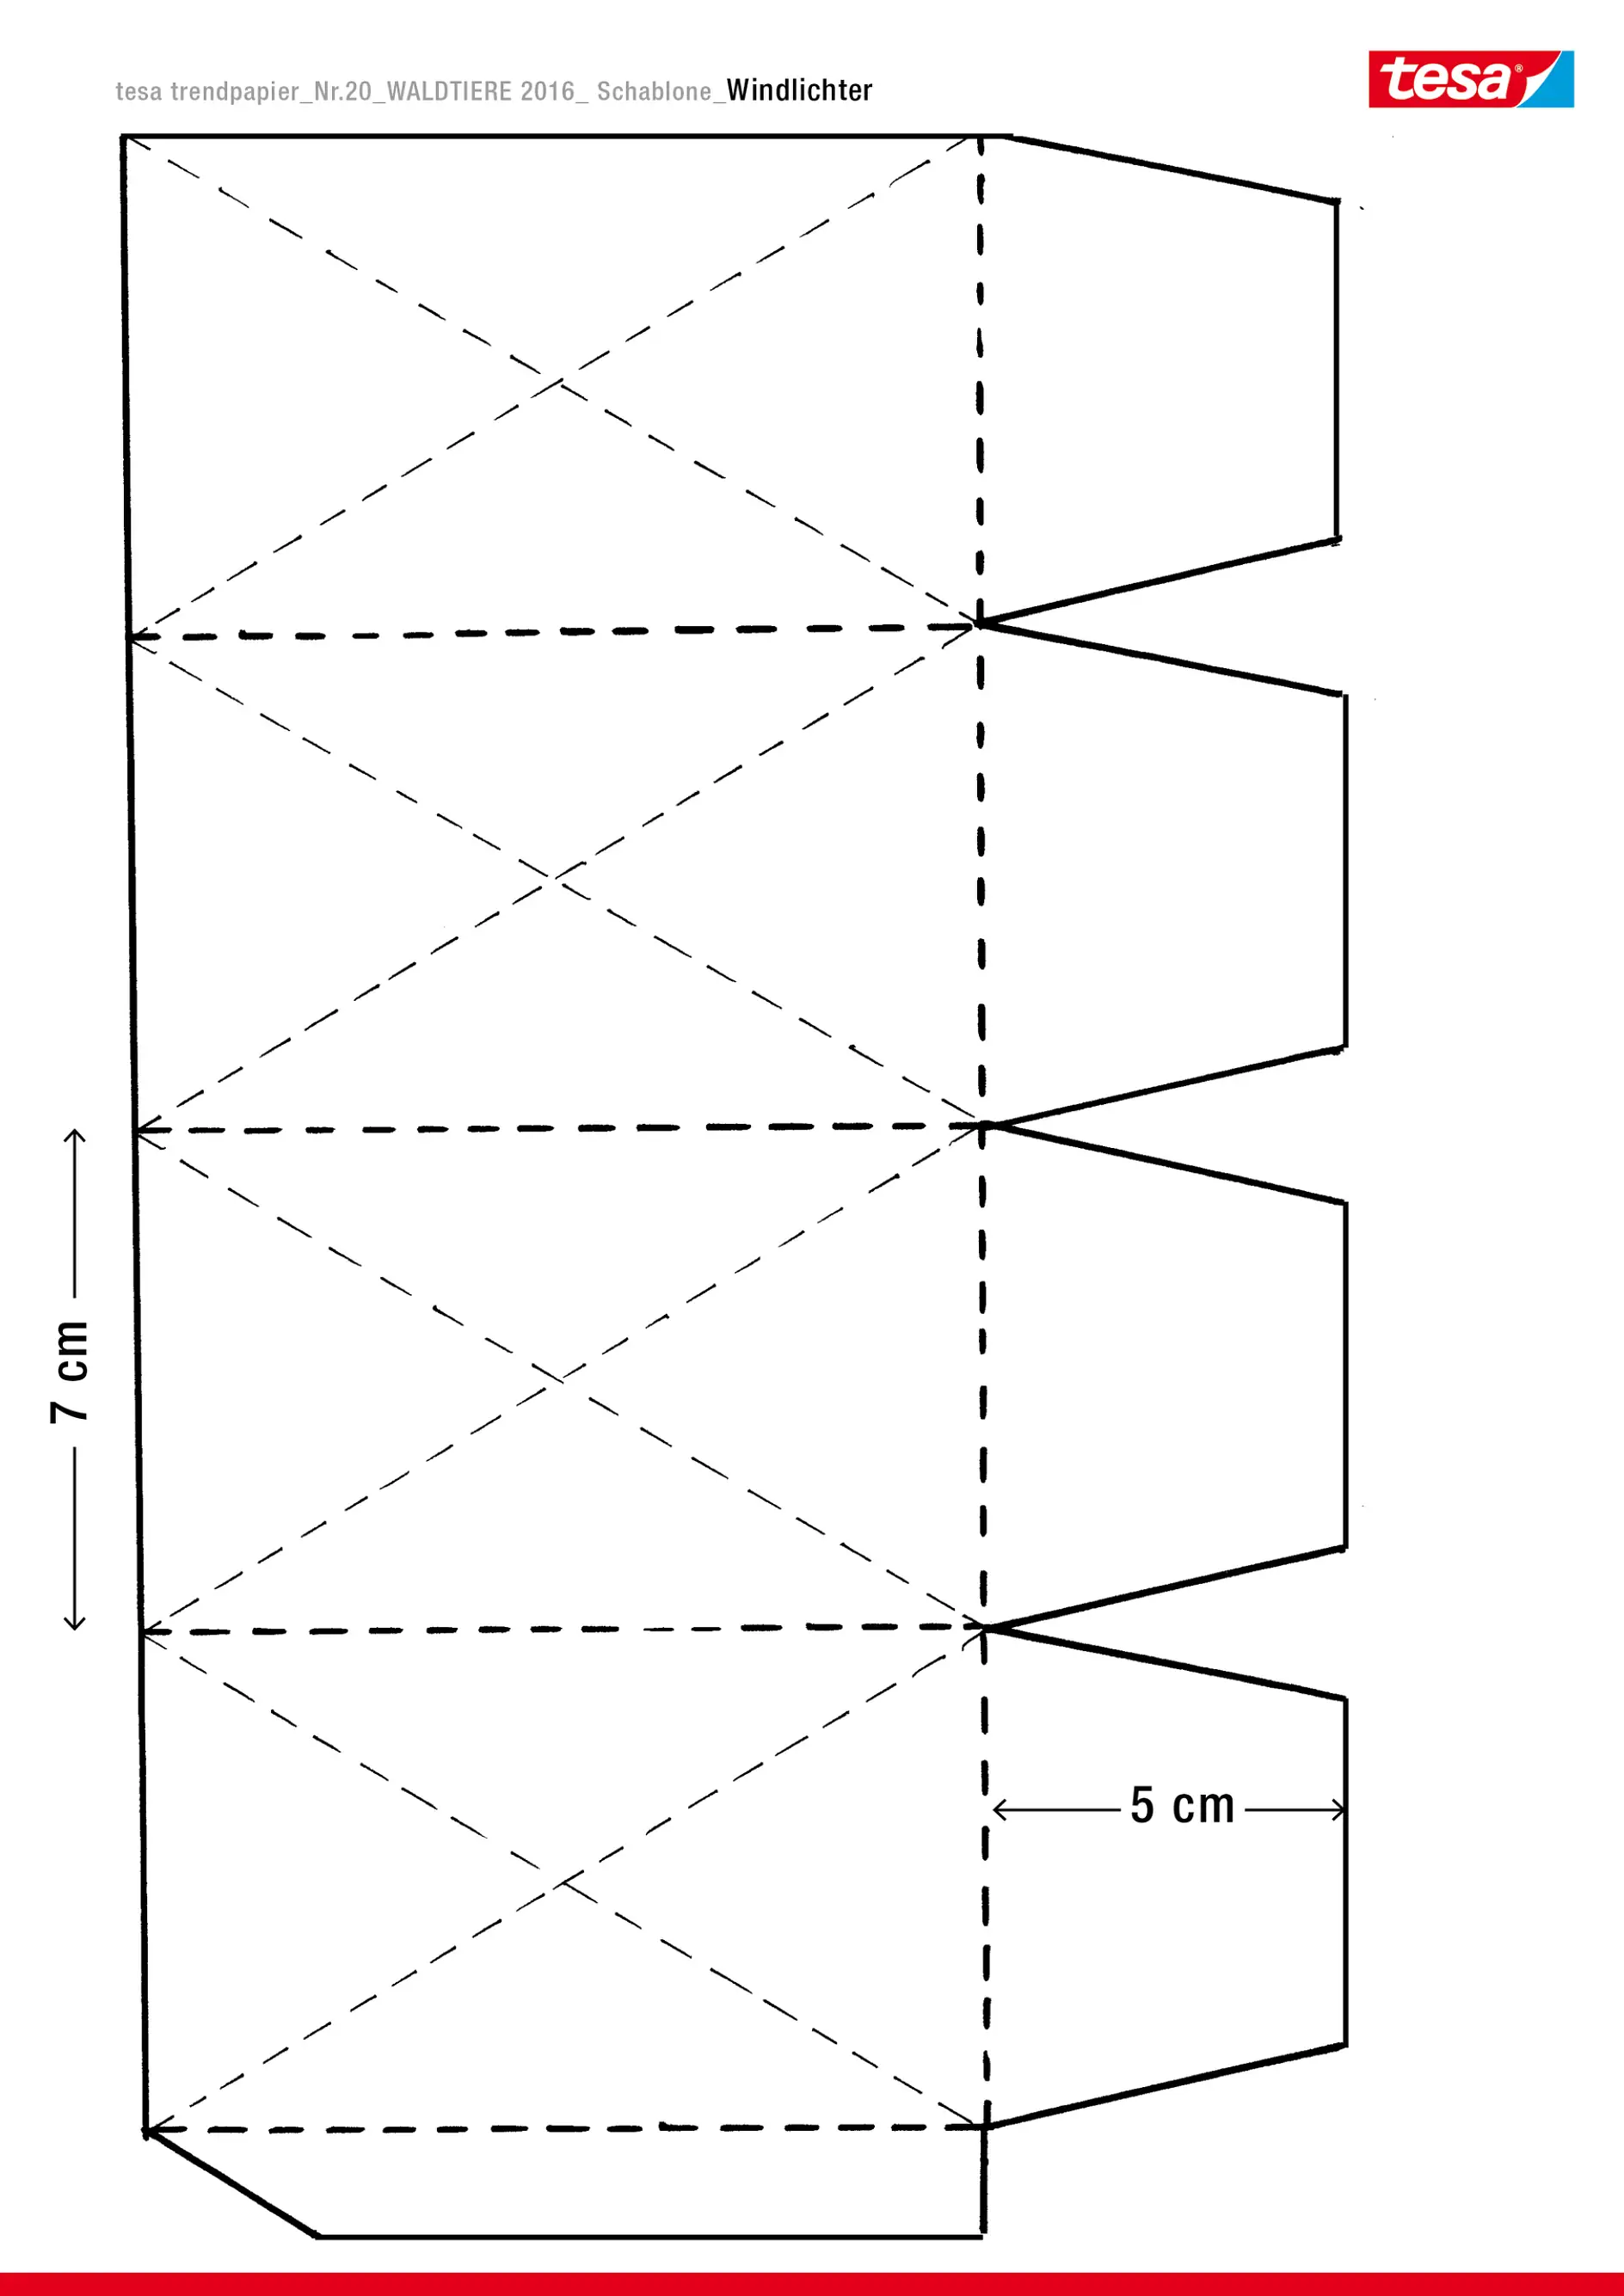 Schematic drawing for paper lanterns